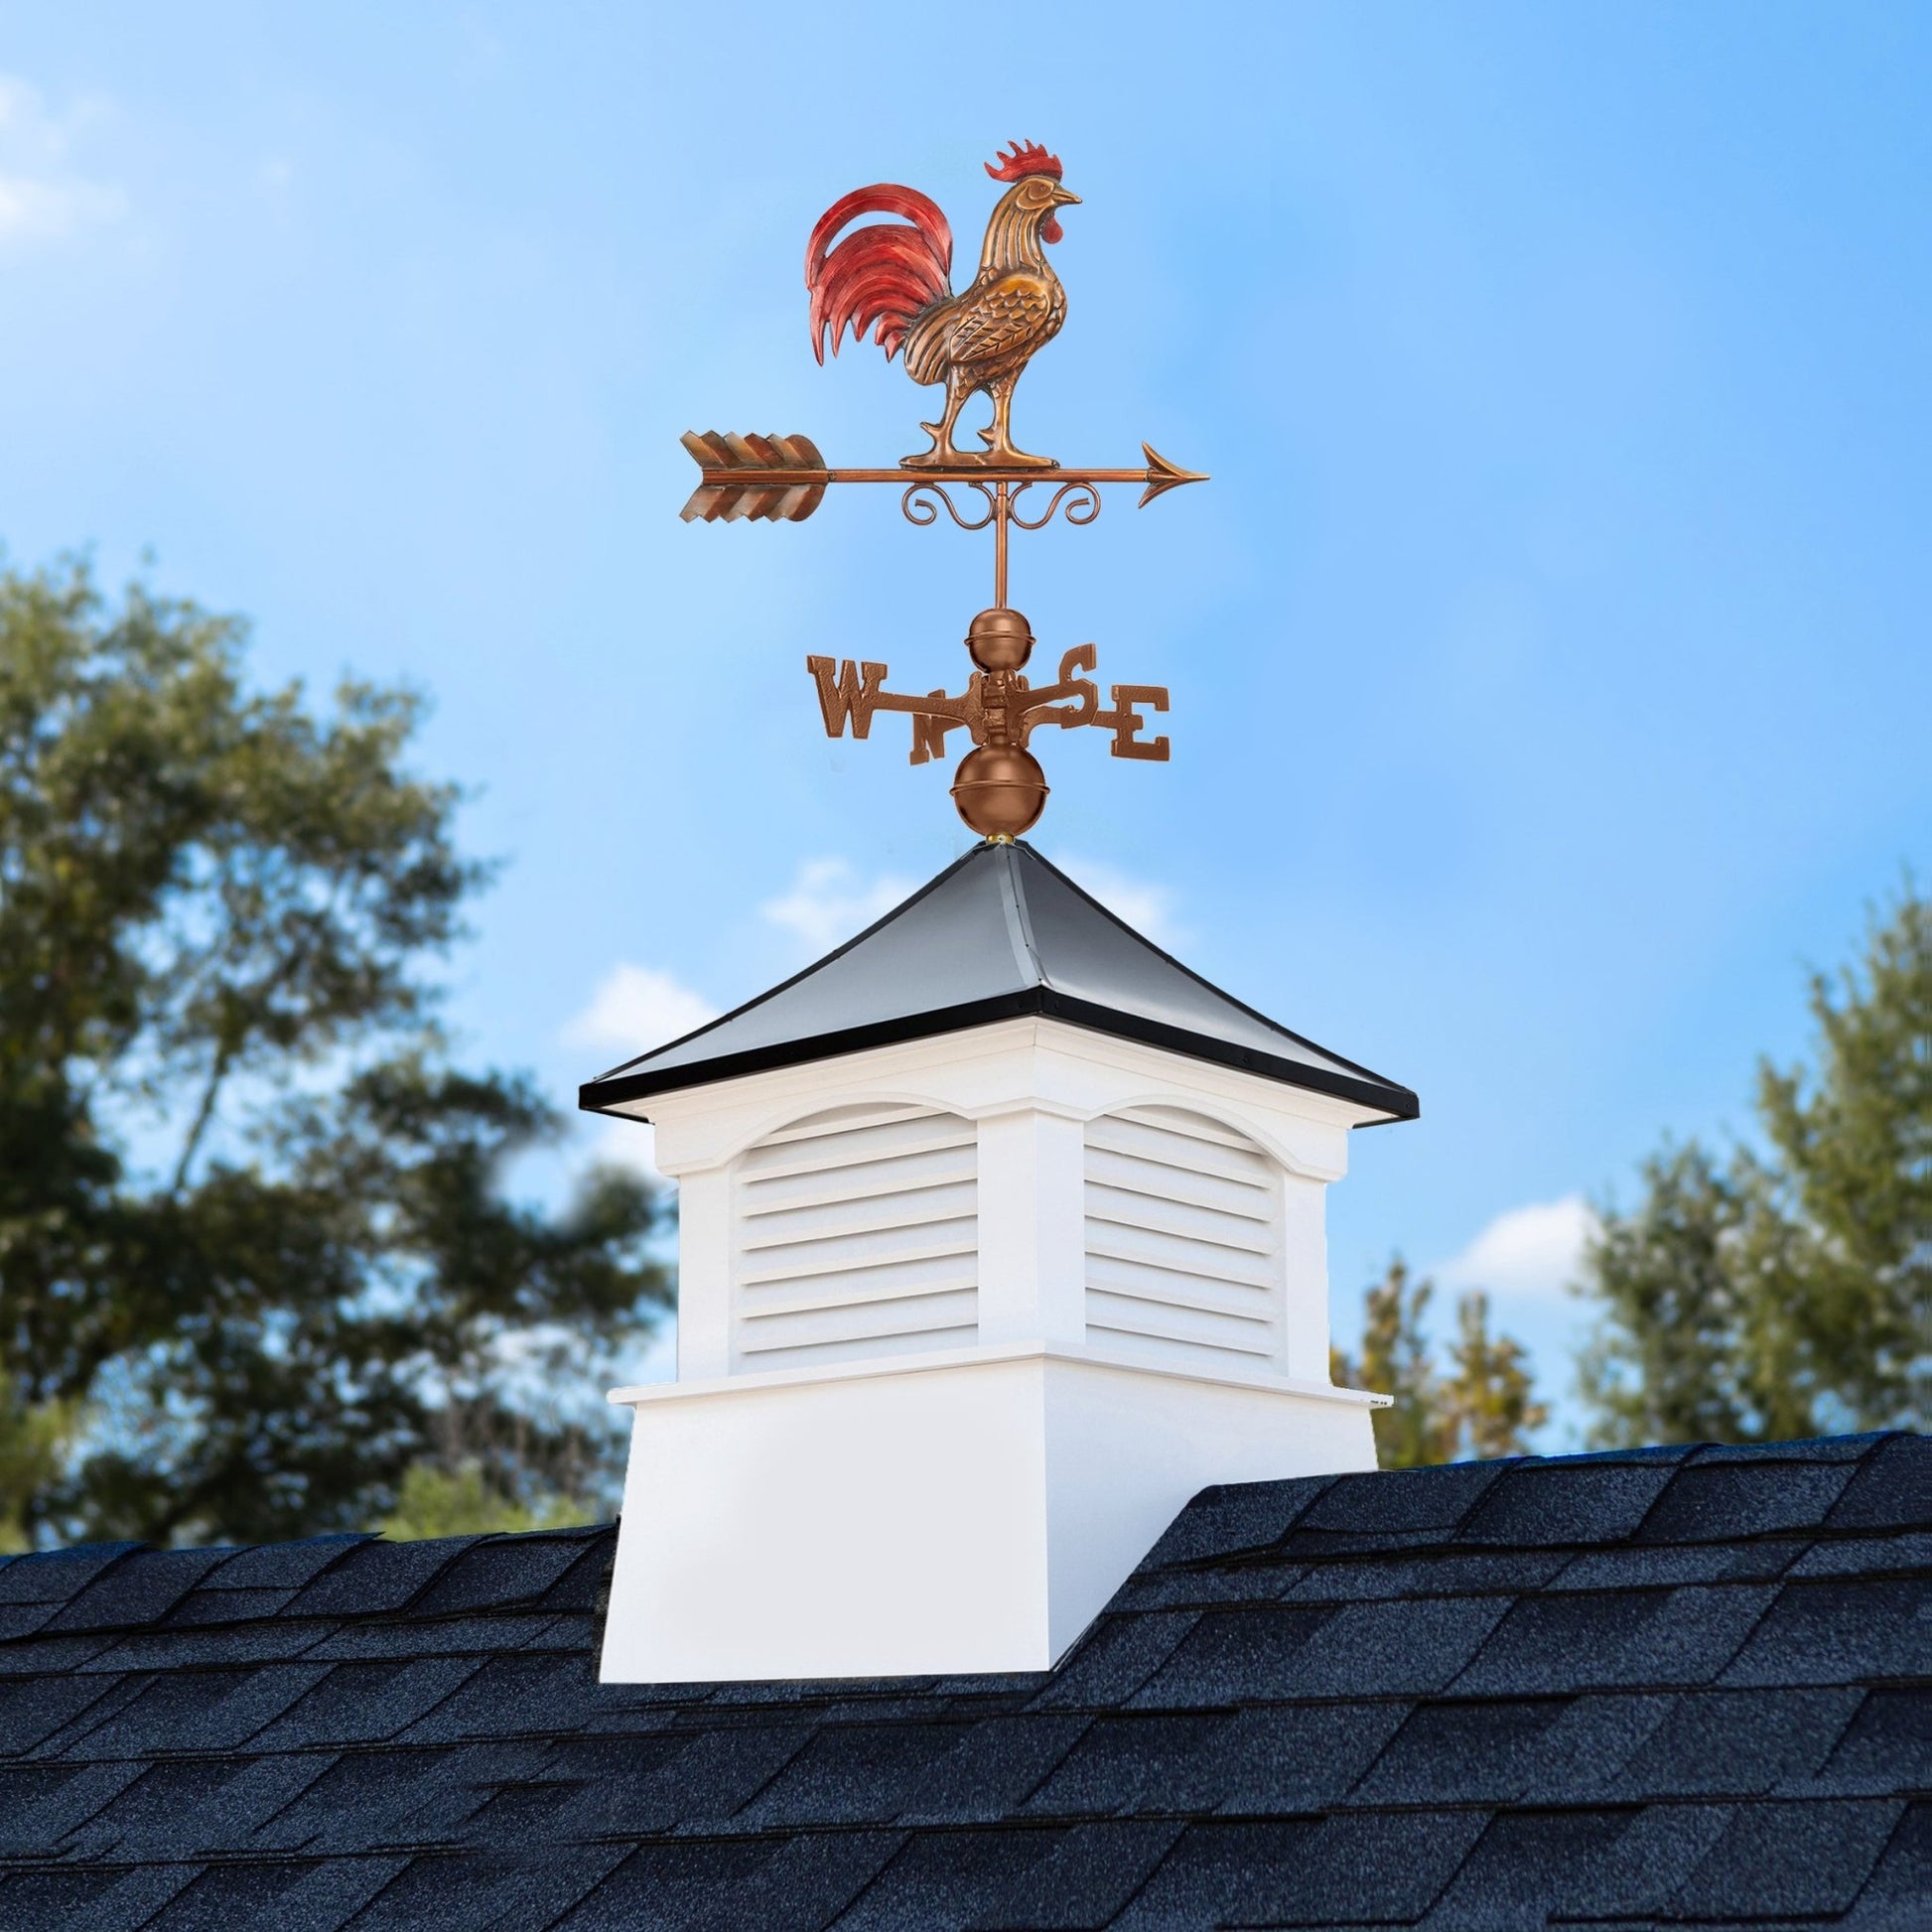 26" Square Coventry Vinyl Cupola with Black Aluminum Roof and Red Rooster Weathervane by Good Directions - Good Directions